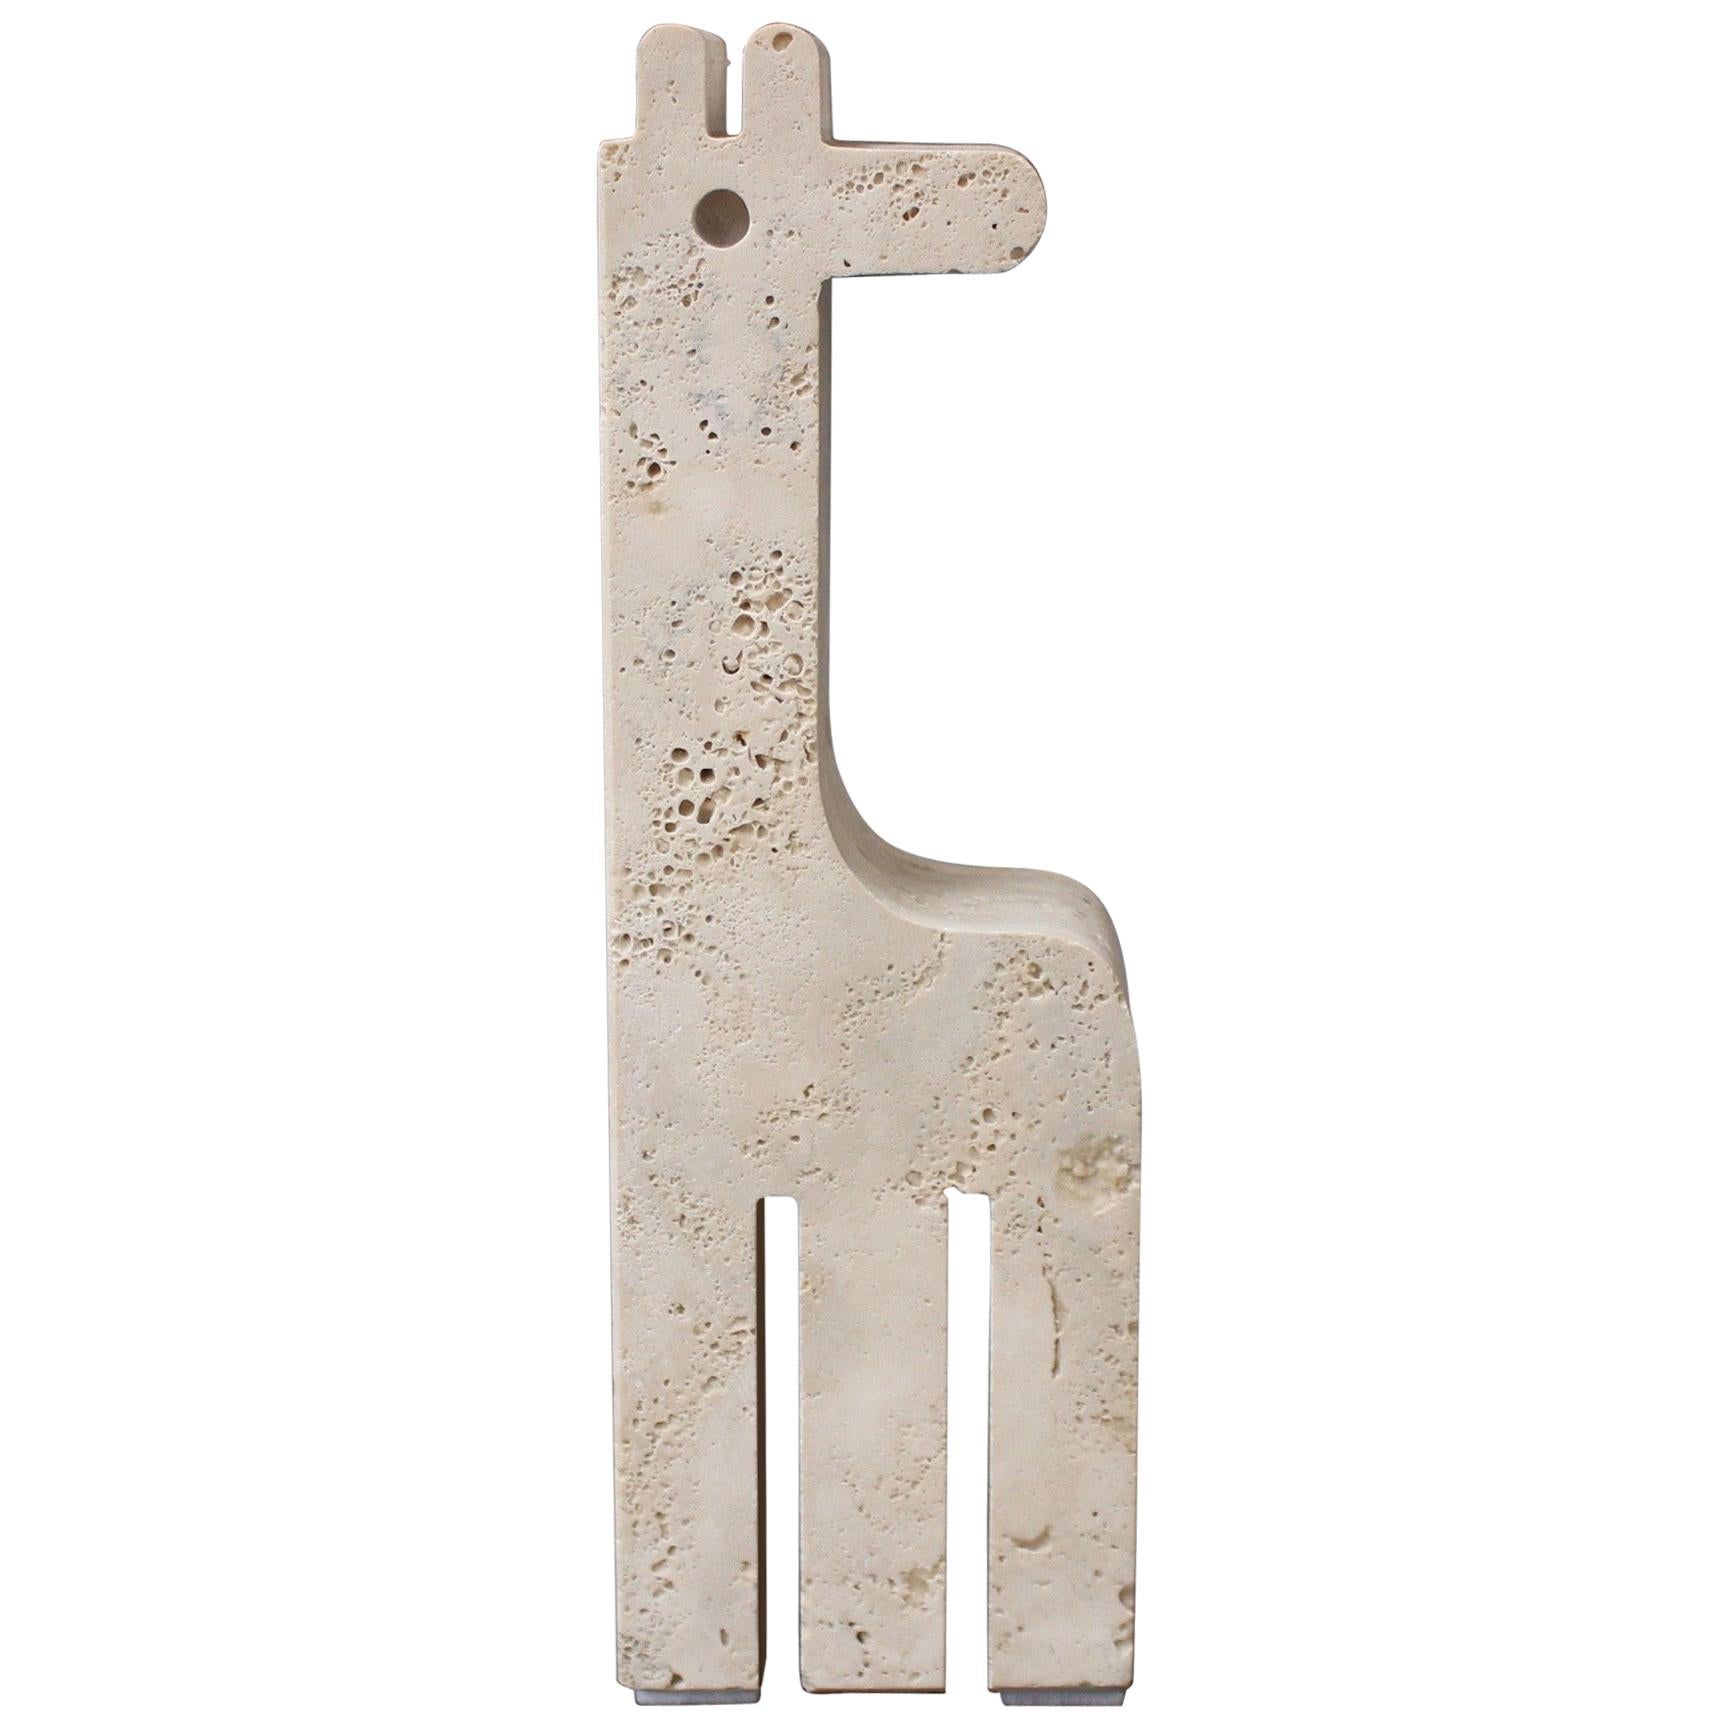 Travertine Giraffe Table Sculpture by Mannelli Bros of Florence, Italy c. 1970s